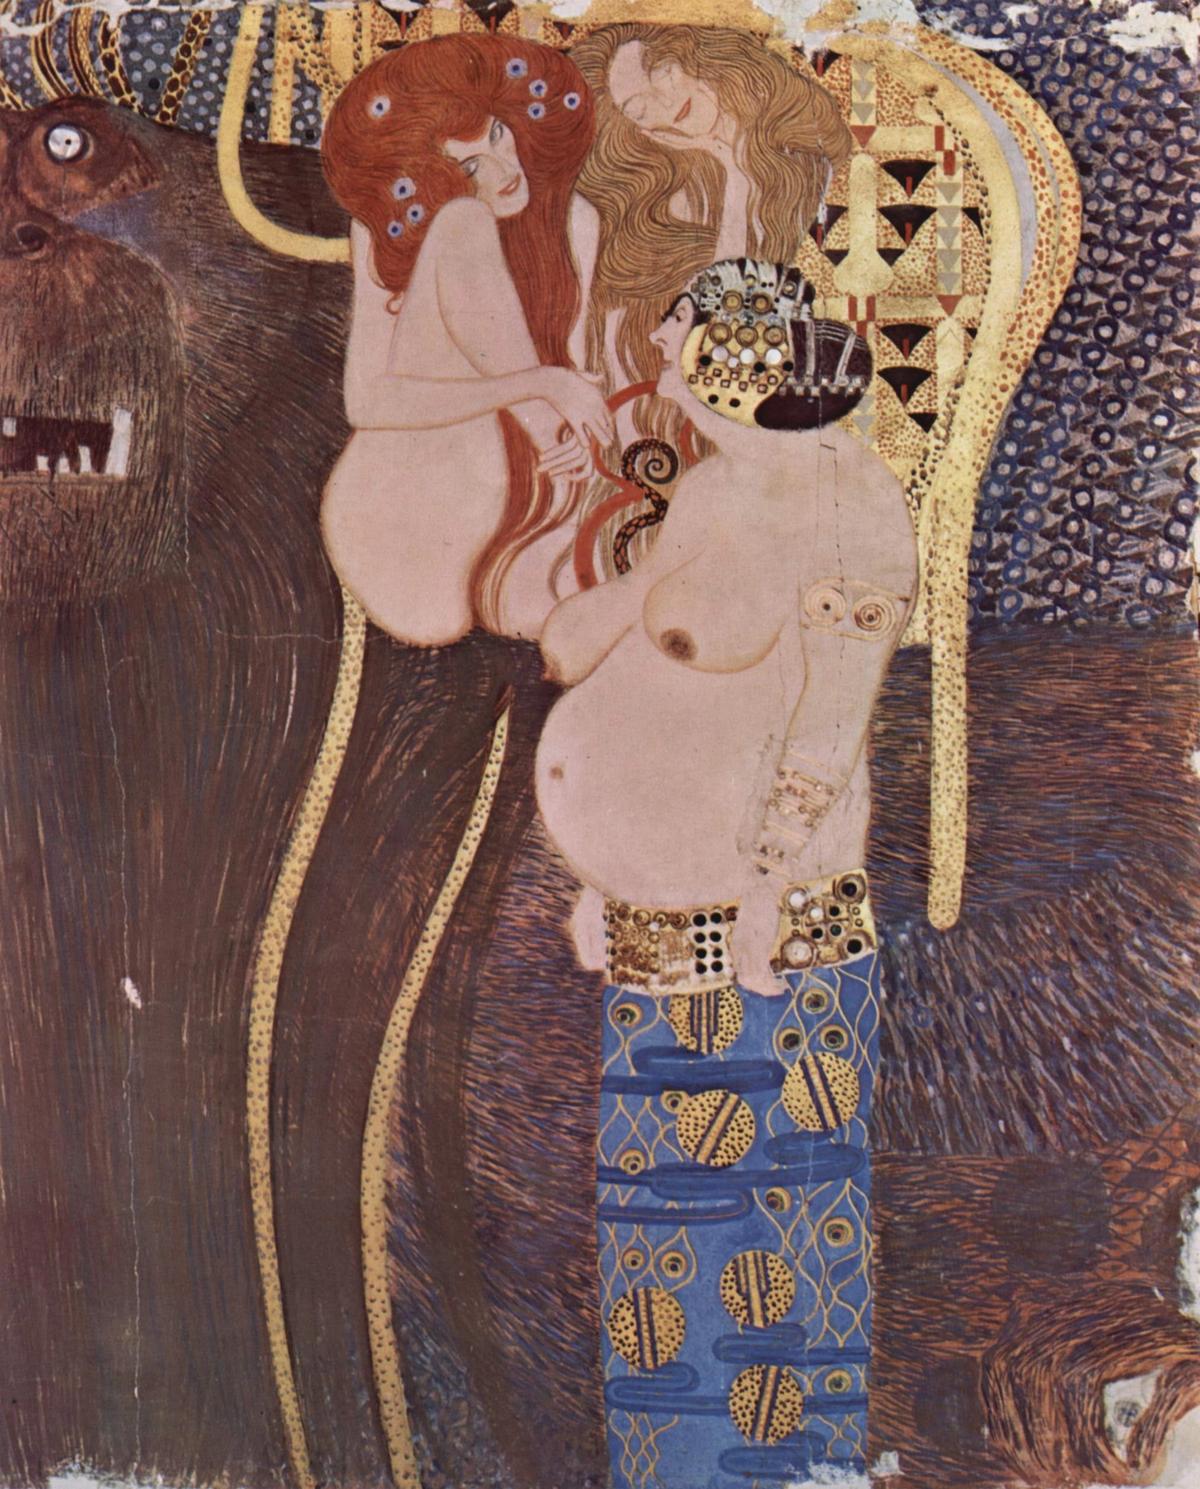 A section from Gustav Klimt's Beethoven Frieze (1902) The Yorck Project (2002) 10.000 Meisterwerke der Malerei, distributed by Directmedia via Wikicommons